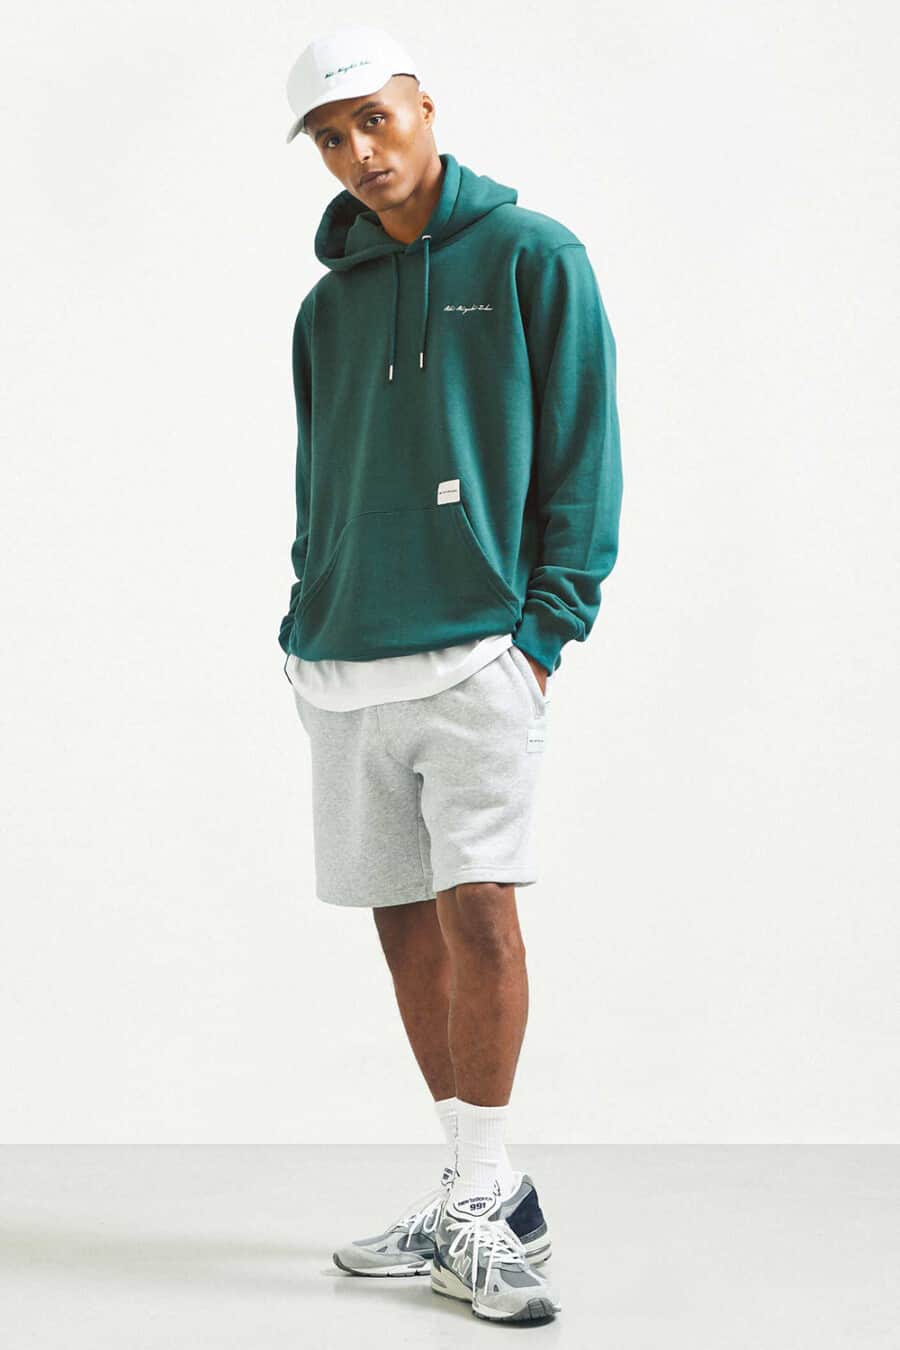 Men's grey jersey shorts, white T-shirt, green streetwear hoodie, white baseball cap, white tube socks and grey New Balance sneakers outfit